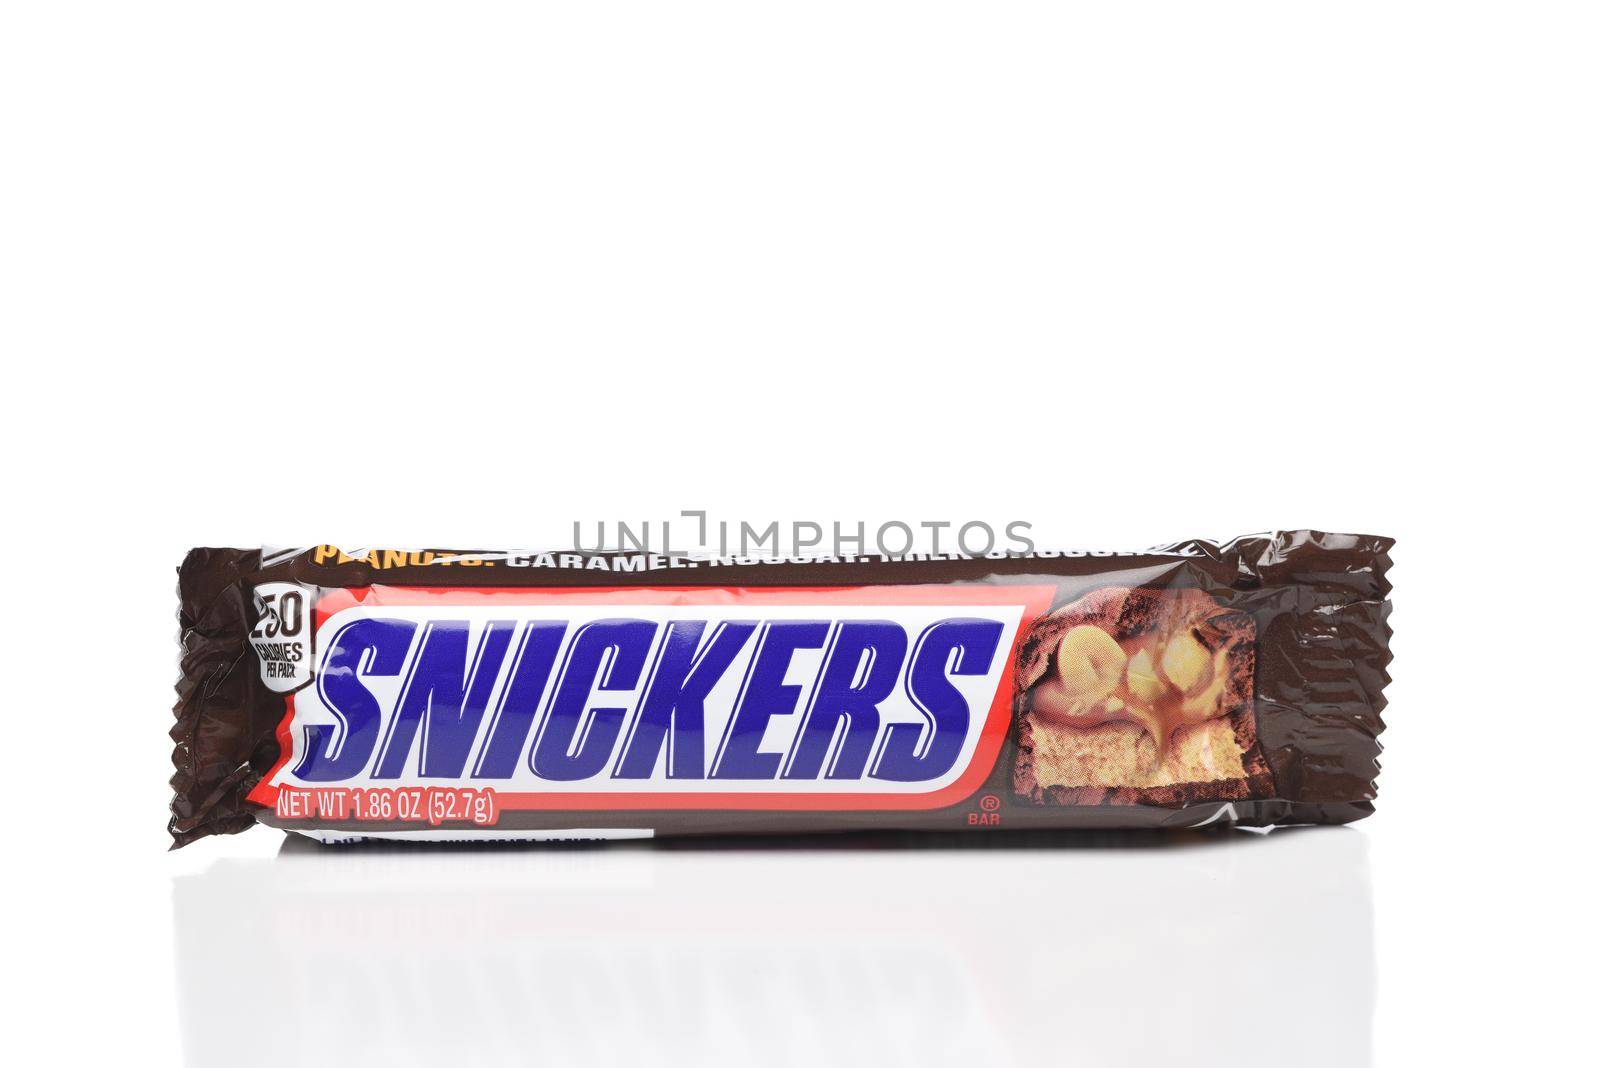 IRVINE, CALIFORNIA - 6 OCT 2020: A Snickers Candy Bar from Mars. by sCukrov